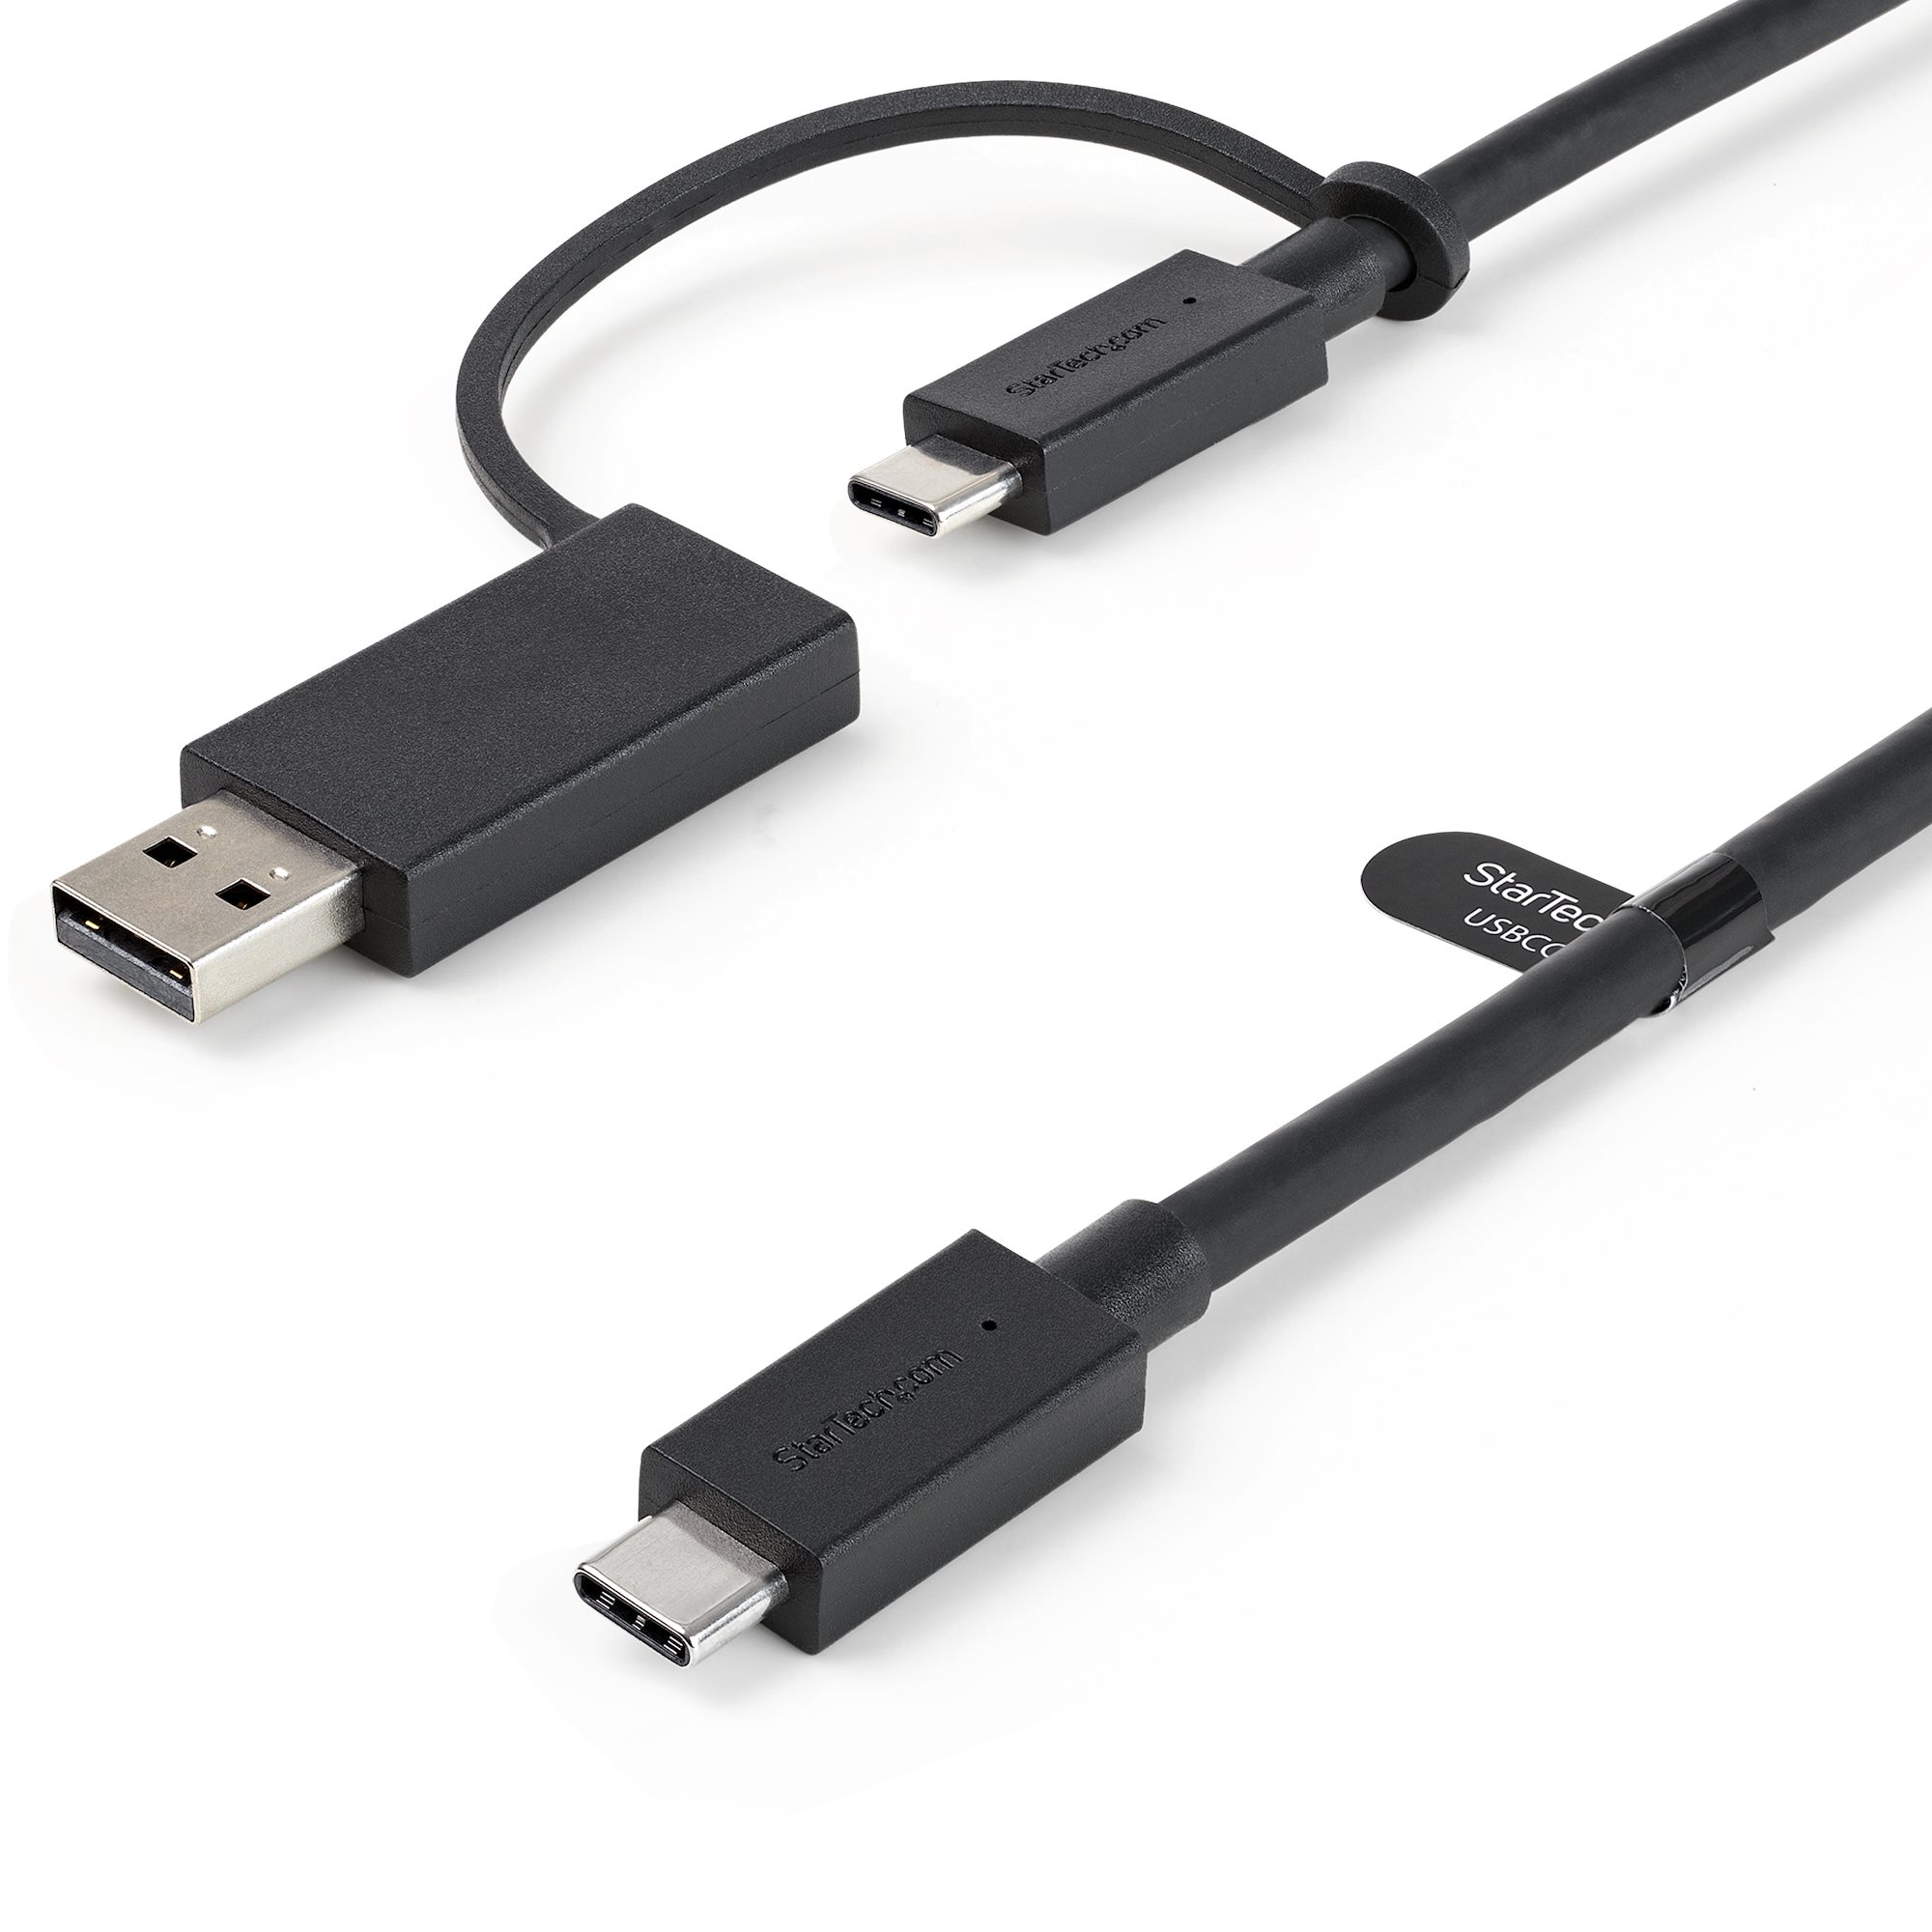 RS PRO USB 3.1 Cable, Male USB A to Male USB C Cable, 1m